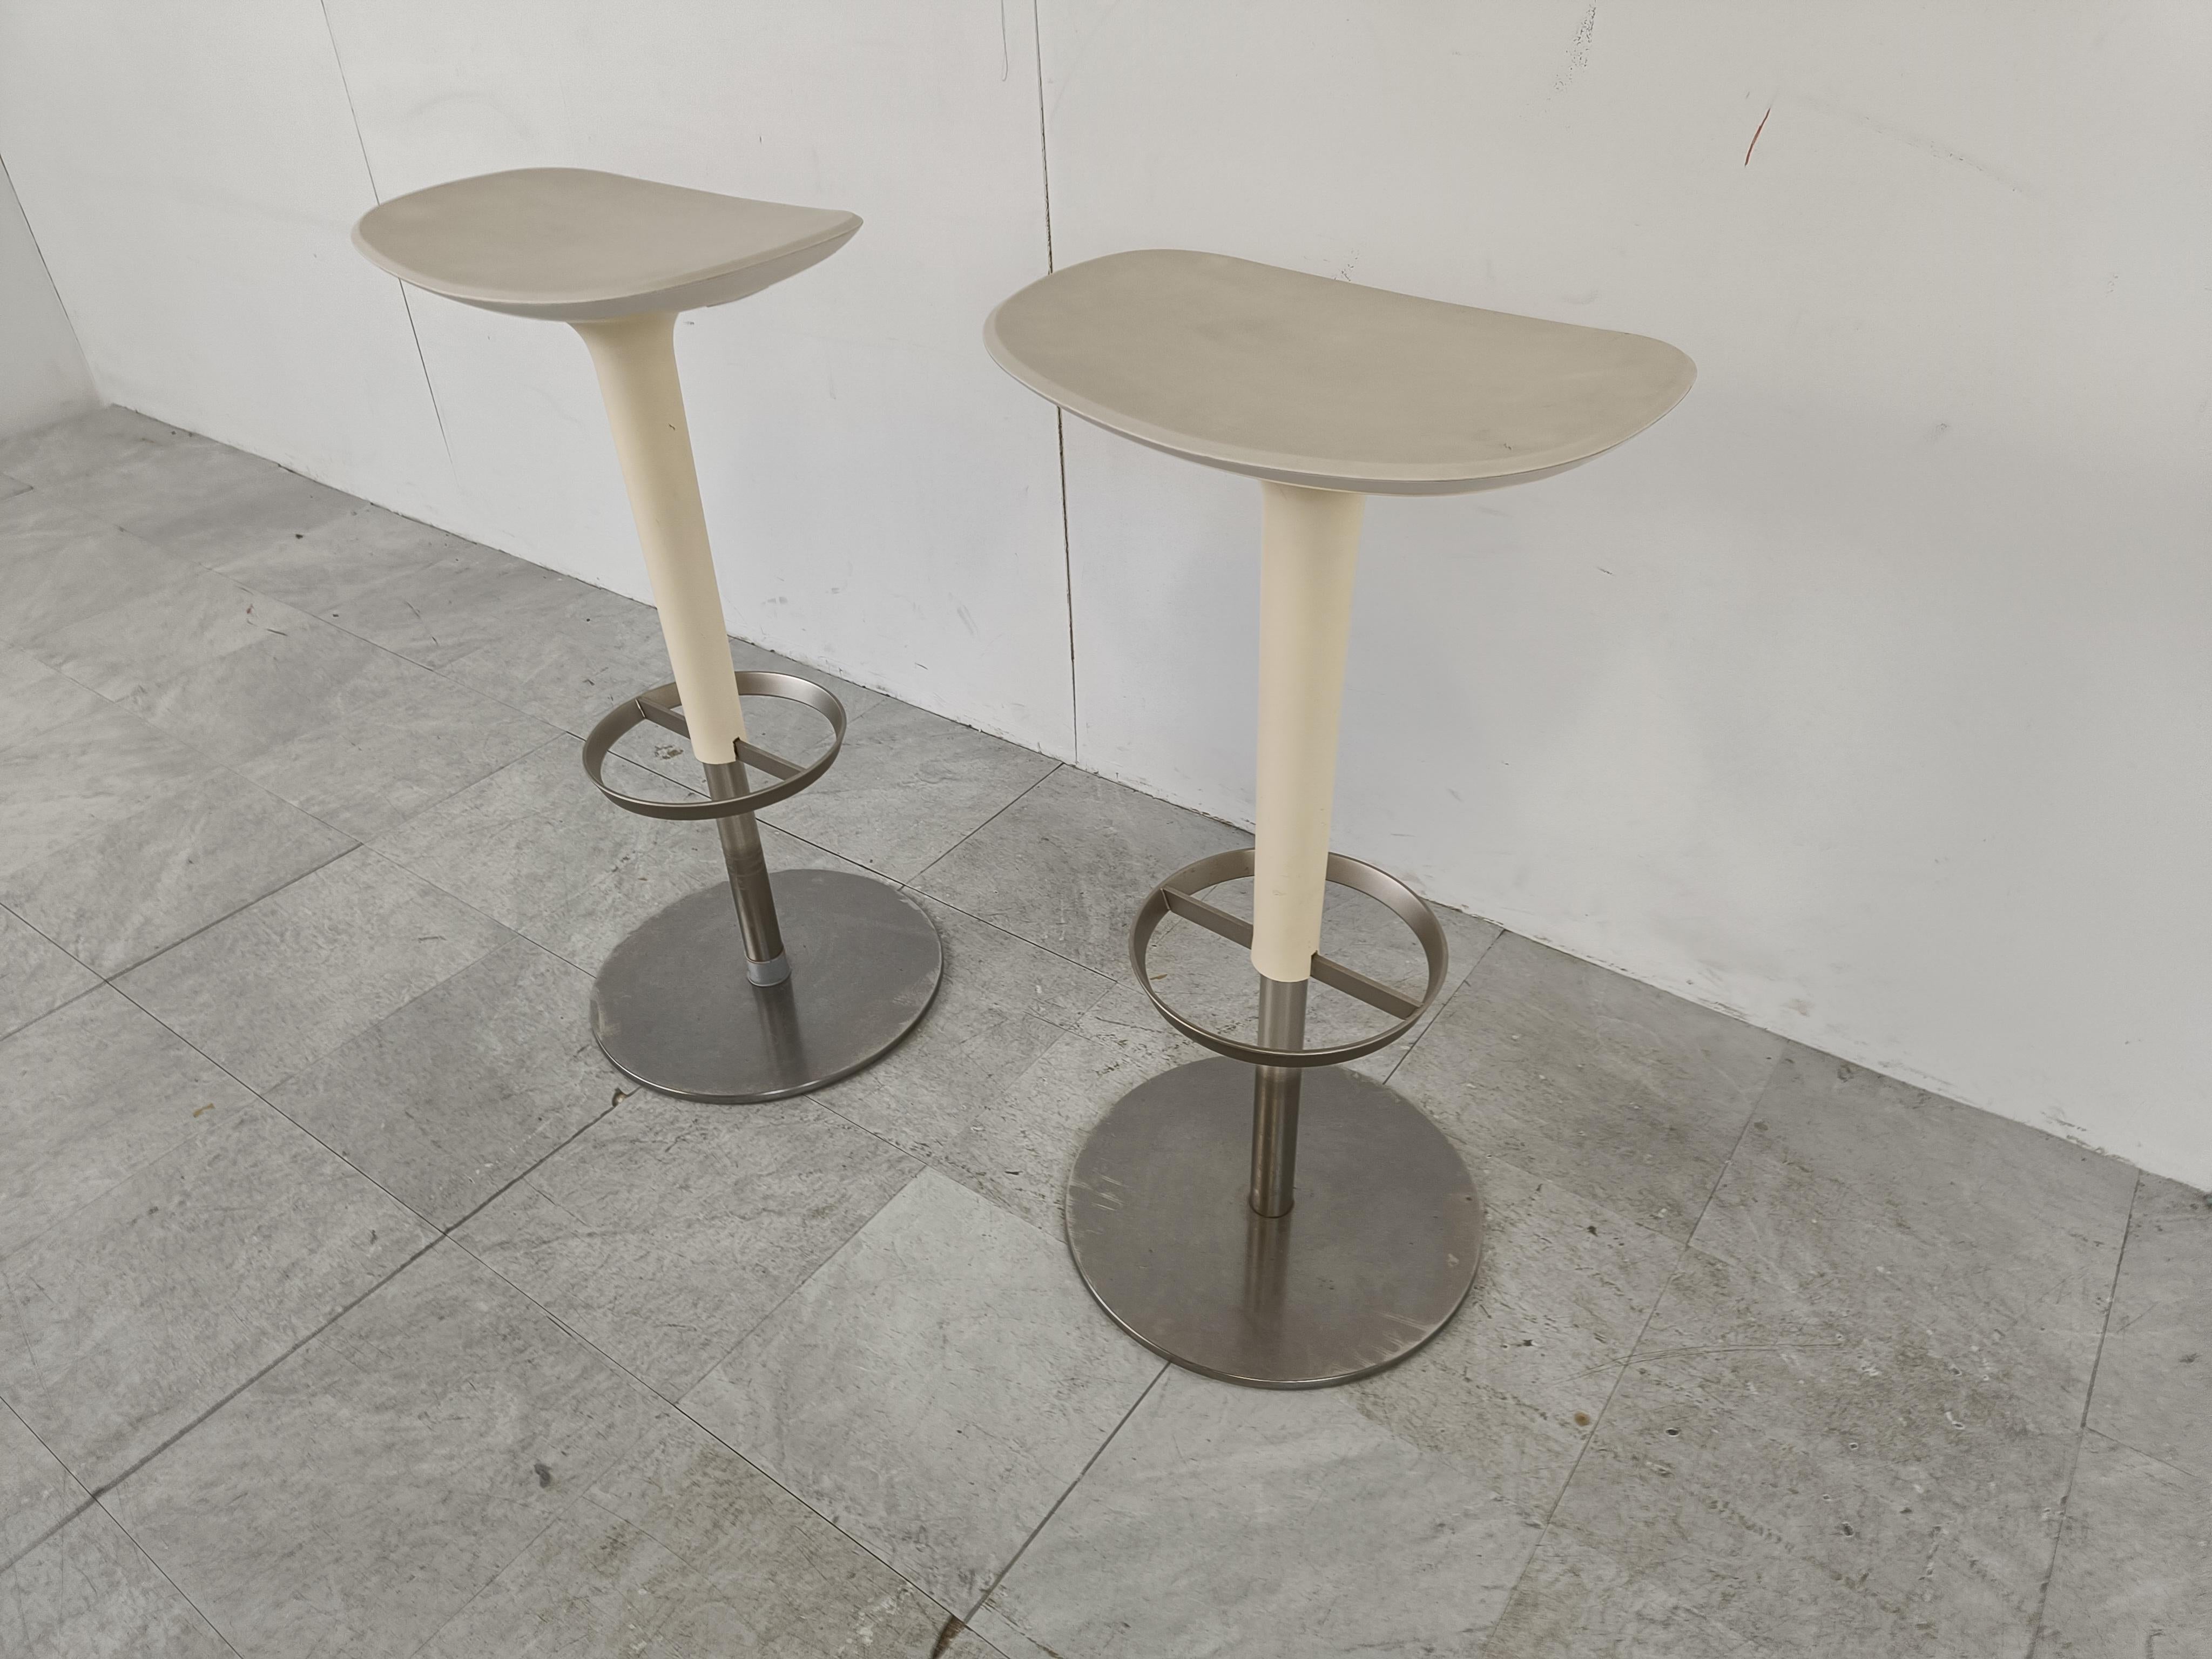 Pair of Arper Bar Stools, 1990s For Sale 1